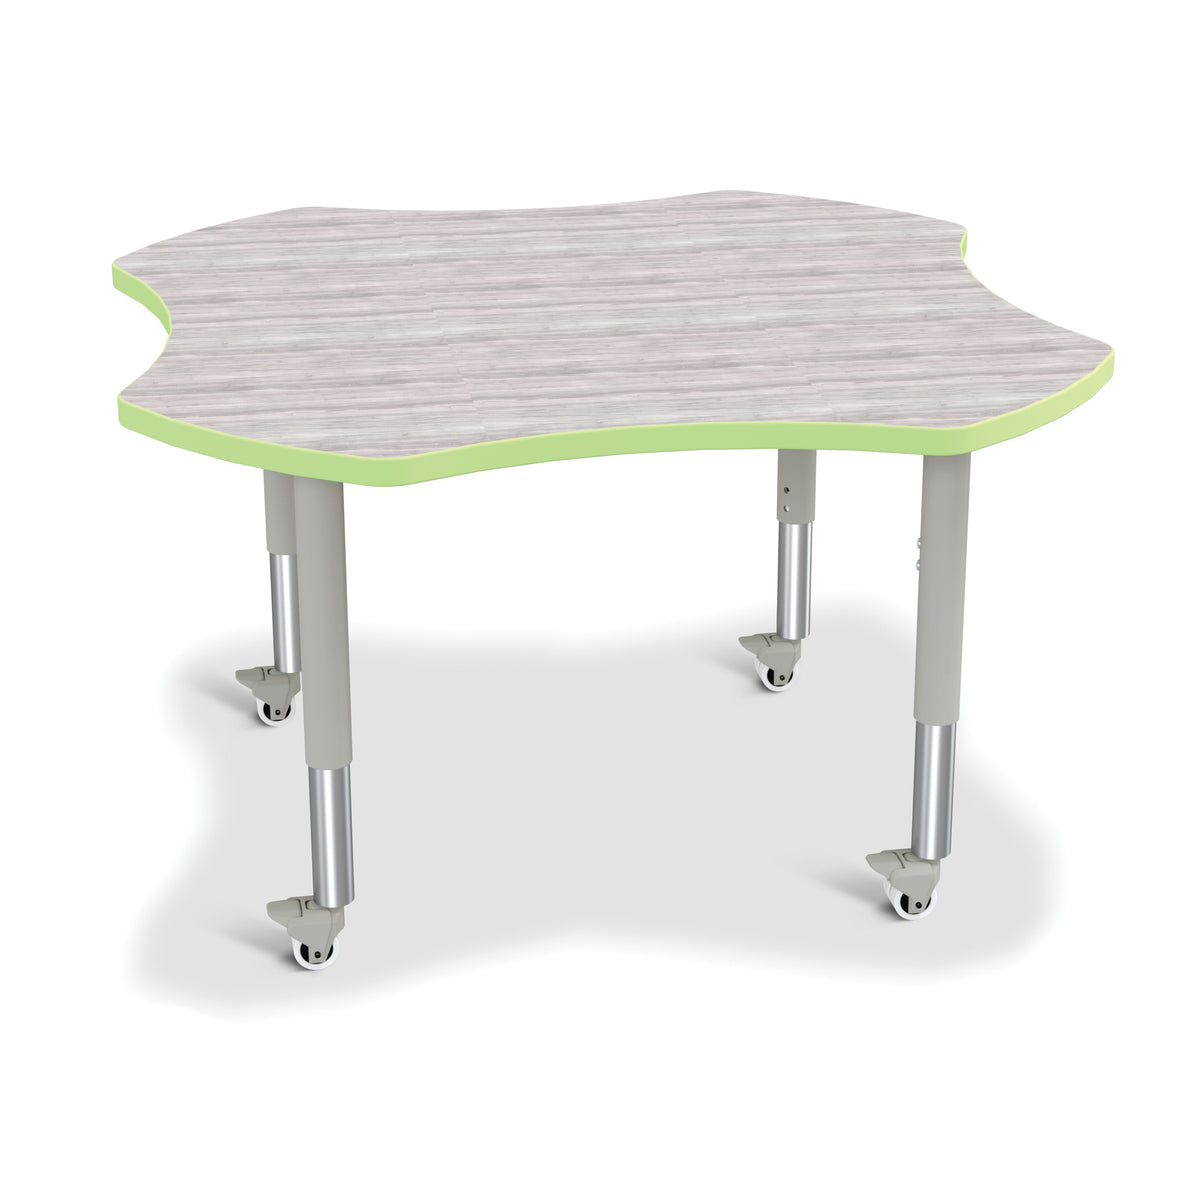 6453JCM451, Berries Four Leaf Activity Table - Mobile - Driftwood Gray/Key Lime/Gray